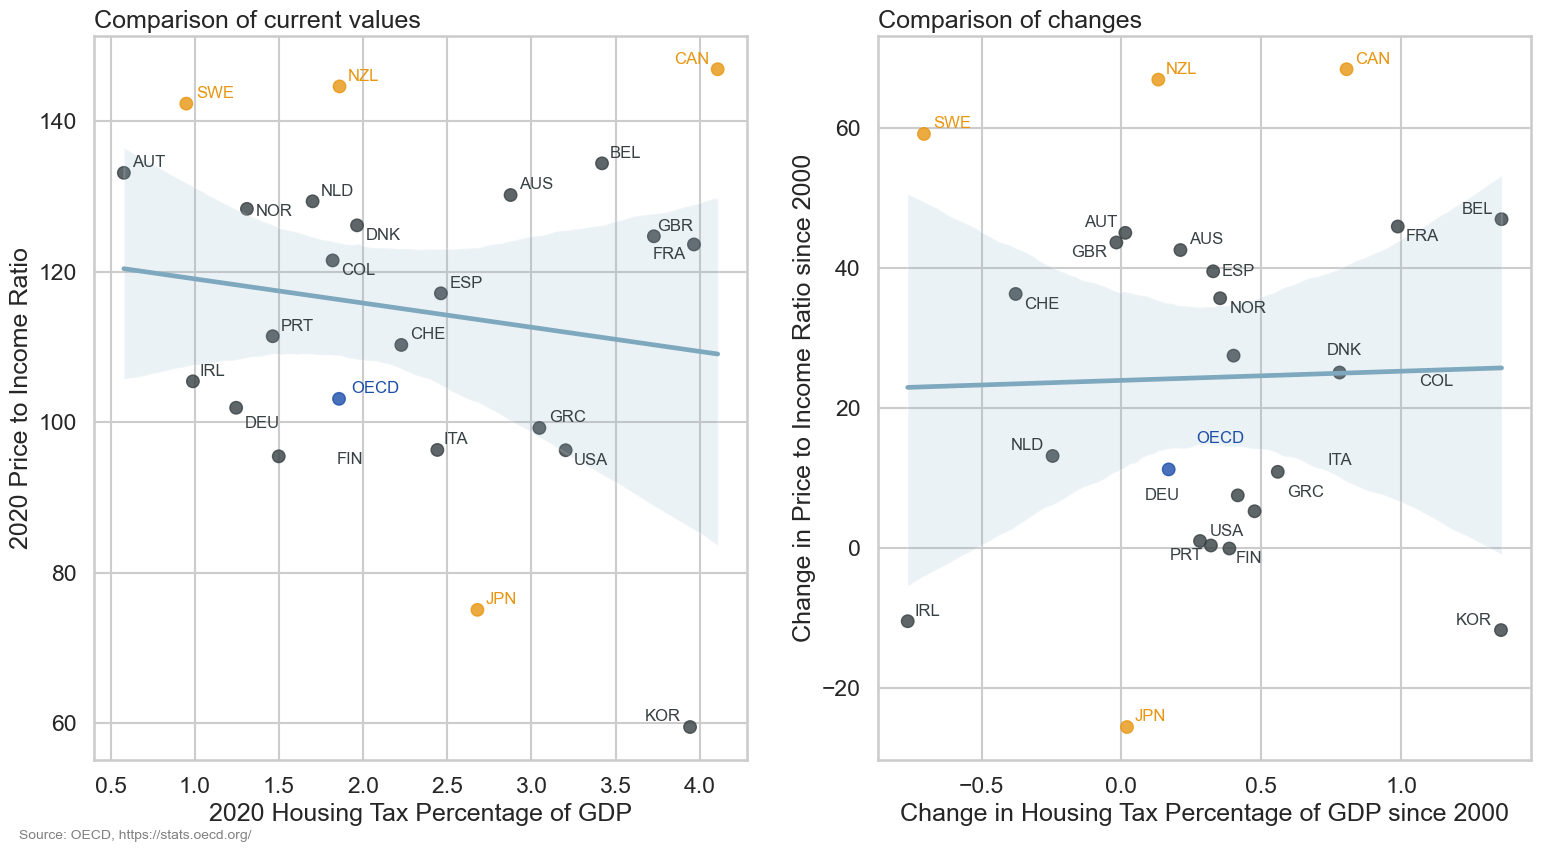 Scatter plot showing the relationship between housing tax as a percentage of GDP and price to income ratio in 2020 and the changes since 2000 for selected OECD countries